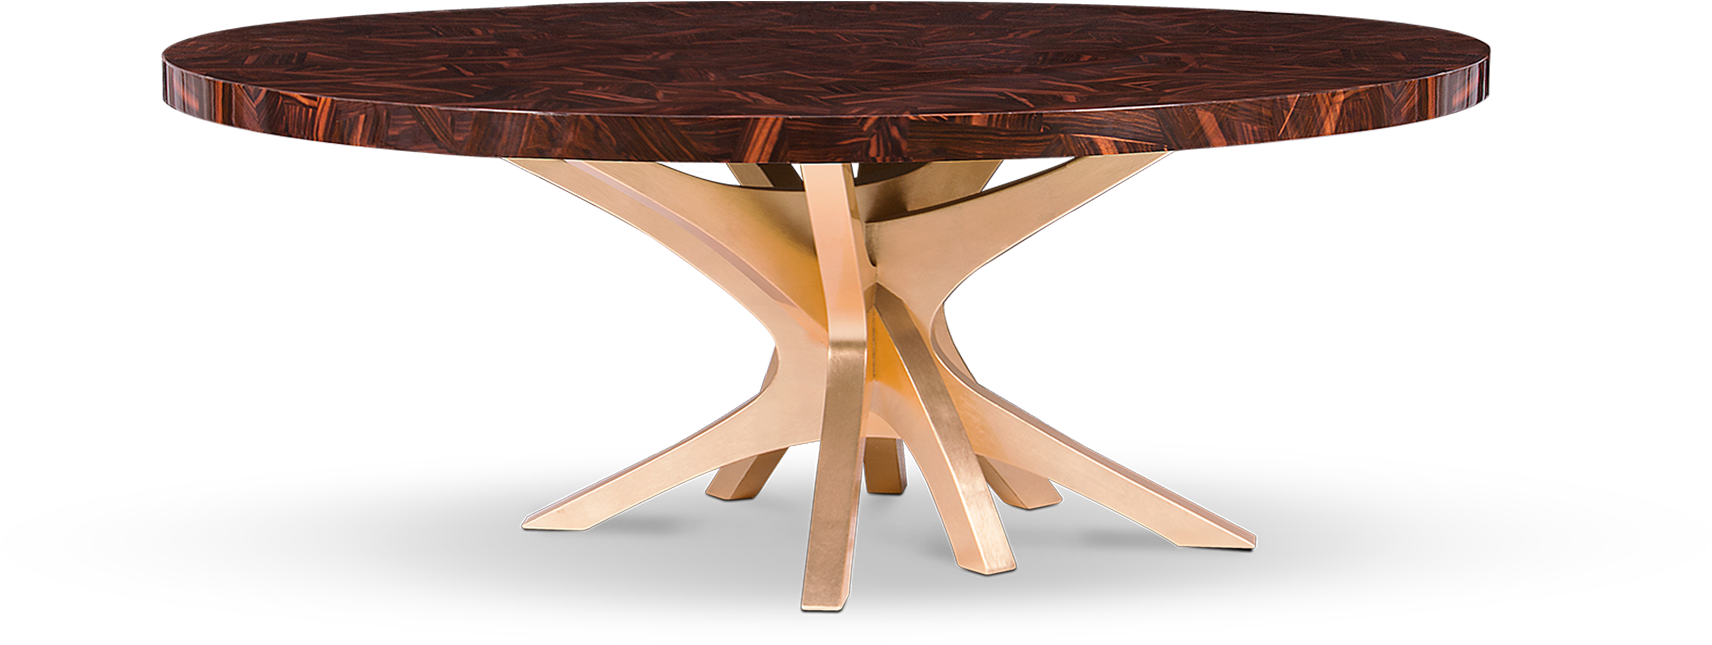 Round Wooden Tablewith Unique Leg Design PNG